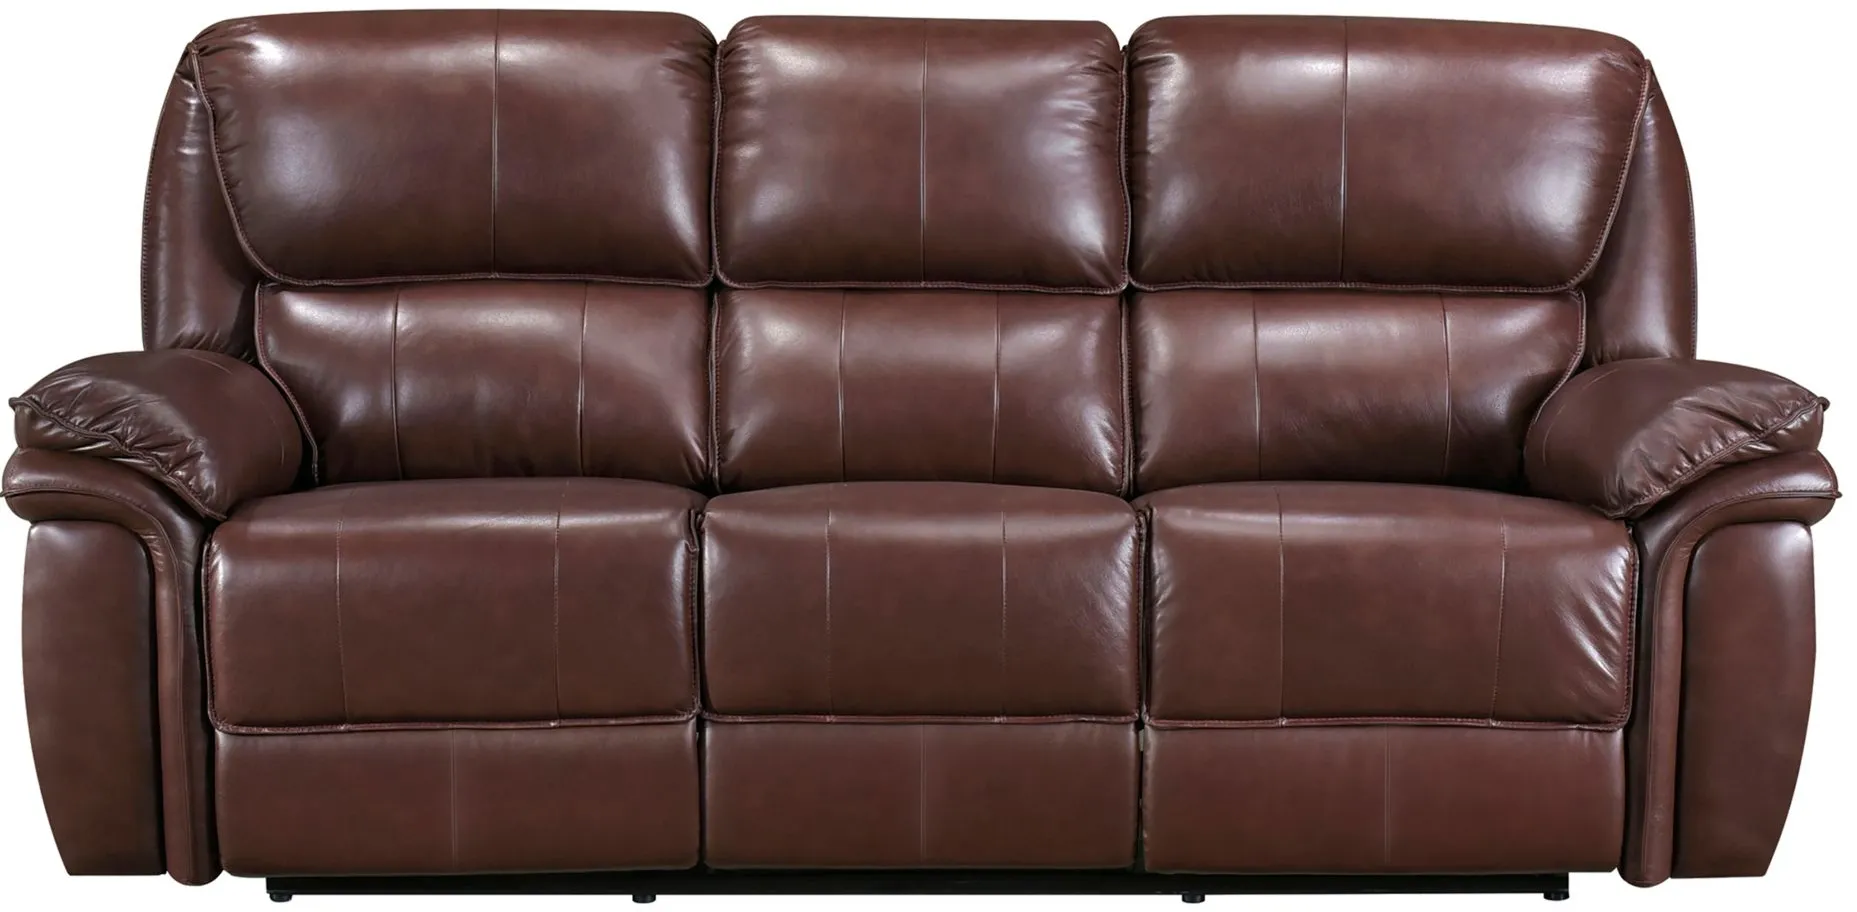 Hazen Double Reclining Sofa in Brown by Homelegance